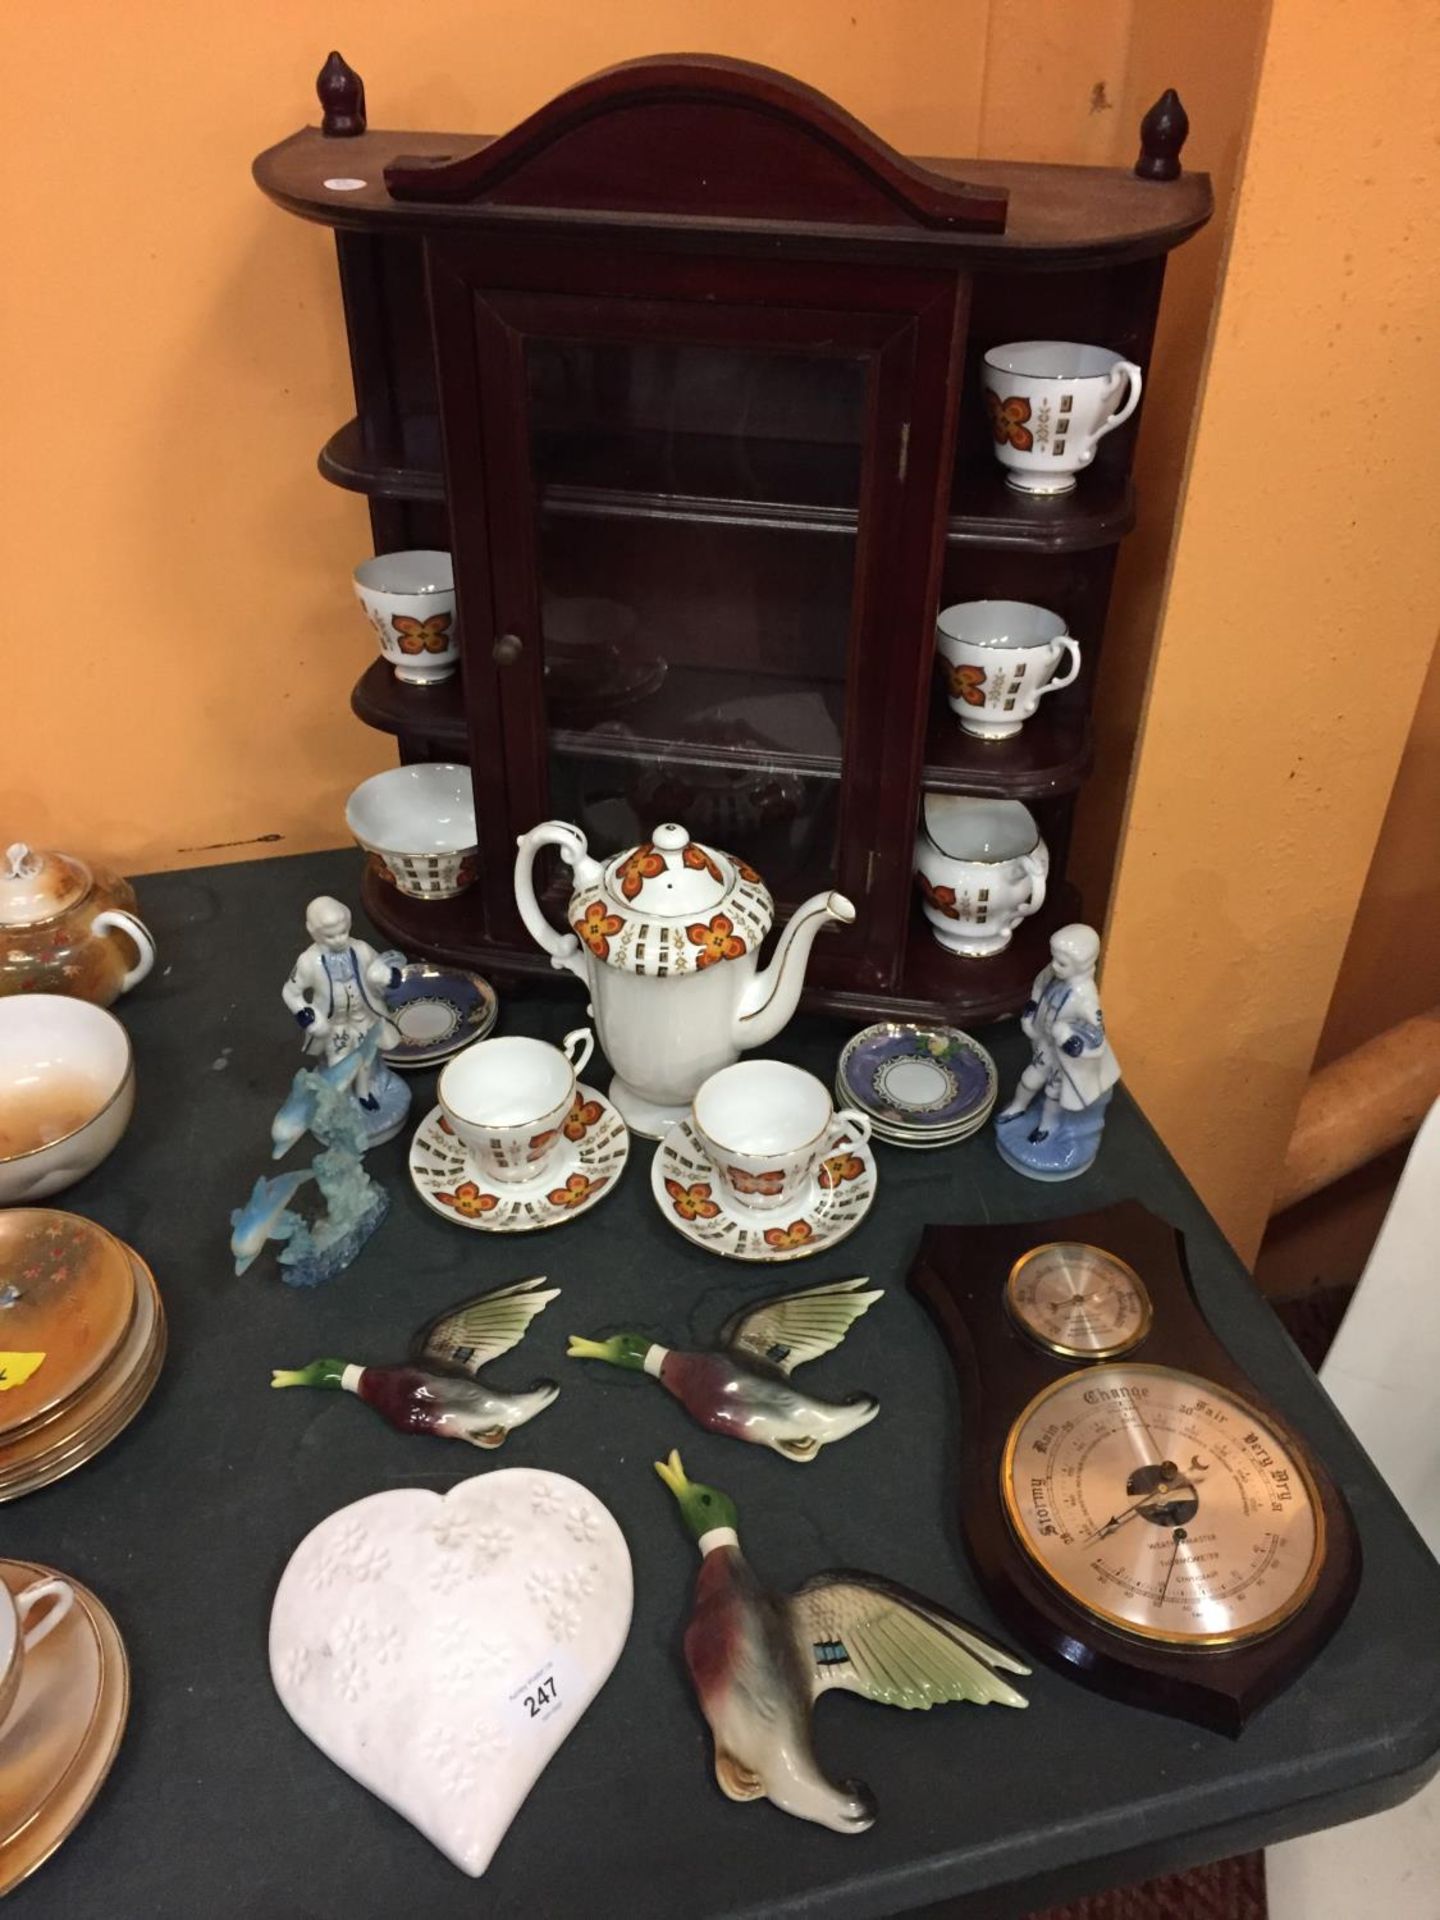 A SMALL WALL CABINET WITH A CLEAR GLASS DOOR AND A NUMBER OF ROYAL STAFFORD CERAMIC WARE, A